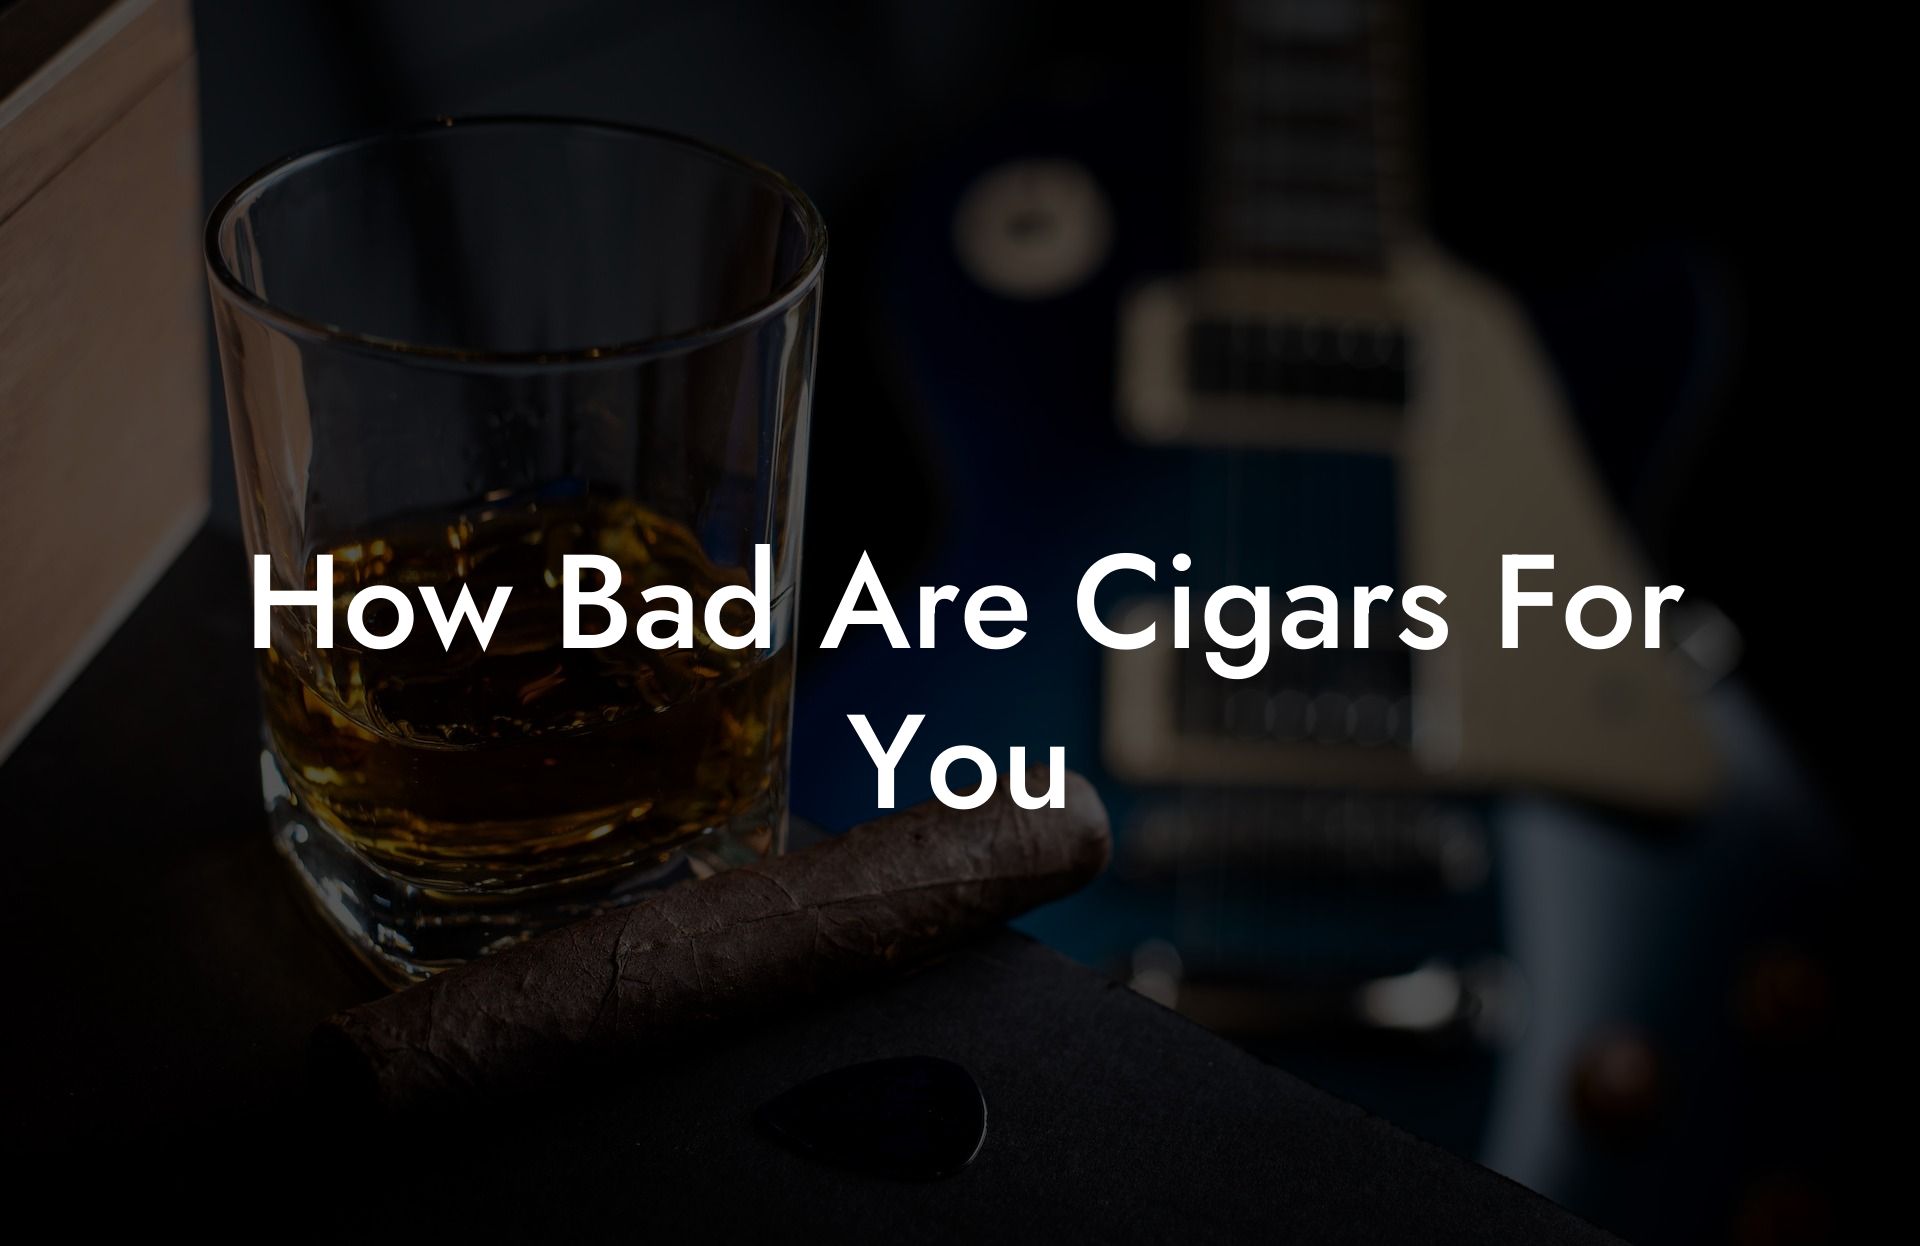 How Bad Are Cigars For You